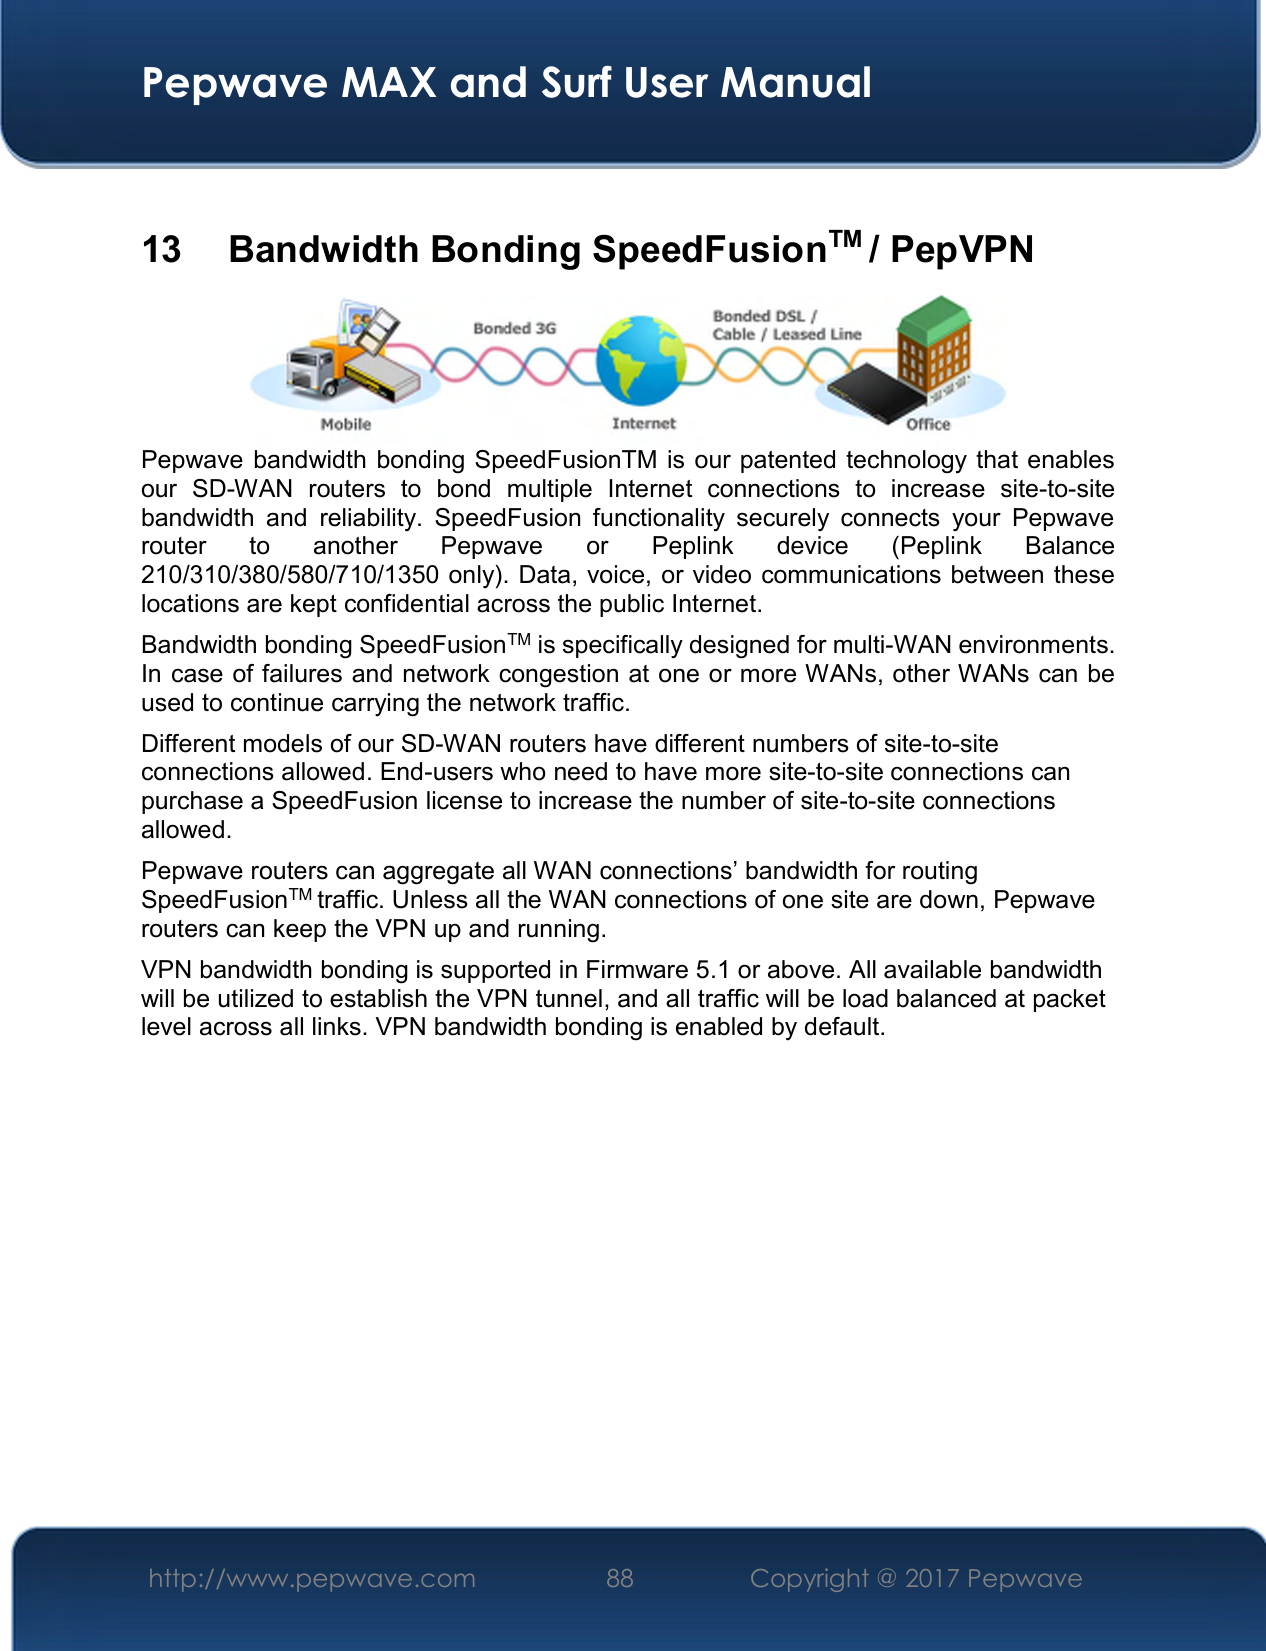  Pepwave MAX and Surf User Manual http://www.pepwave.com  88    Copyright @ 2017 Pepwave    13   Bandwidth Bonding SpeedFusionTM / PepVPN  Pepwave bandwidth bonding SpeedFusionTM is our patented technology that enables our  SD-WAN  routers  to  bond  multiple  Internet  connections  to  increase  site-to-site bandwidth  and  reliability.  SpeedFusion  functionality  securely  connects  your  Pepwave router  to  another  Pepwave  or  Peplink  device  (Peplink  Balance 210/310/380/580/710/1350 only). Data, voice, or video communications between these locations are kept confidential across the public Internet. Bandwidth bonding SpeedFusionTM is specifically designed for multi-WAN environments. In case of failures and network congestion at one or more WANs, other WANs can be used to continue carrying the network traffic.   Different models of our SD-WAN routers have different numbers of site-to-site connections allowed. End-users who need to have more site-to-site connections can purchase a SpeedFusion license to increase the number of site-to-site connections allowed. Pepwave routers can aggregate all WAN connections’ bandwidth for routing SpeedFusionTM traffic. Unless all the WAN connections of one site are down, Pepwave routers can keep the VPN up and running. VPN bandwidth bonding is supported in Firmware 5.1 or above. All available bandwidth will be utilized to establish the VPN tunnel, and all traffic will be load balanced at packet level across all links. VPN bandwidth bonding is enabled by default.     